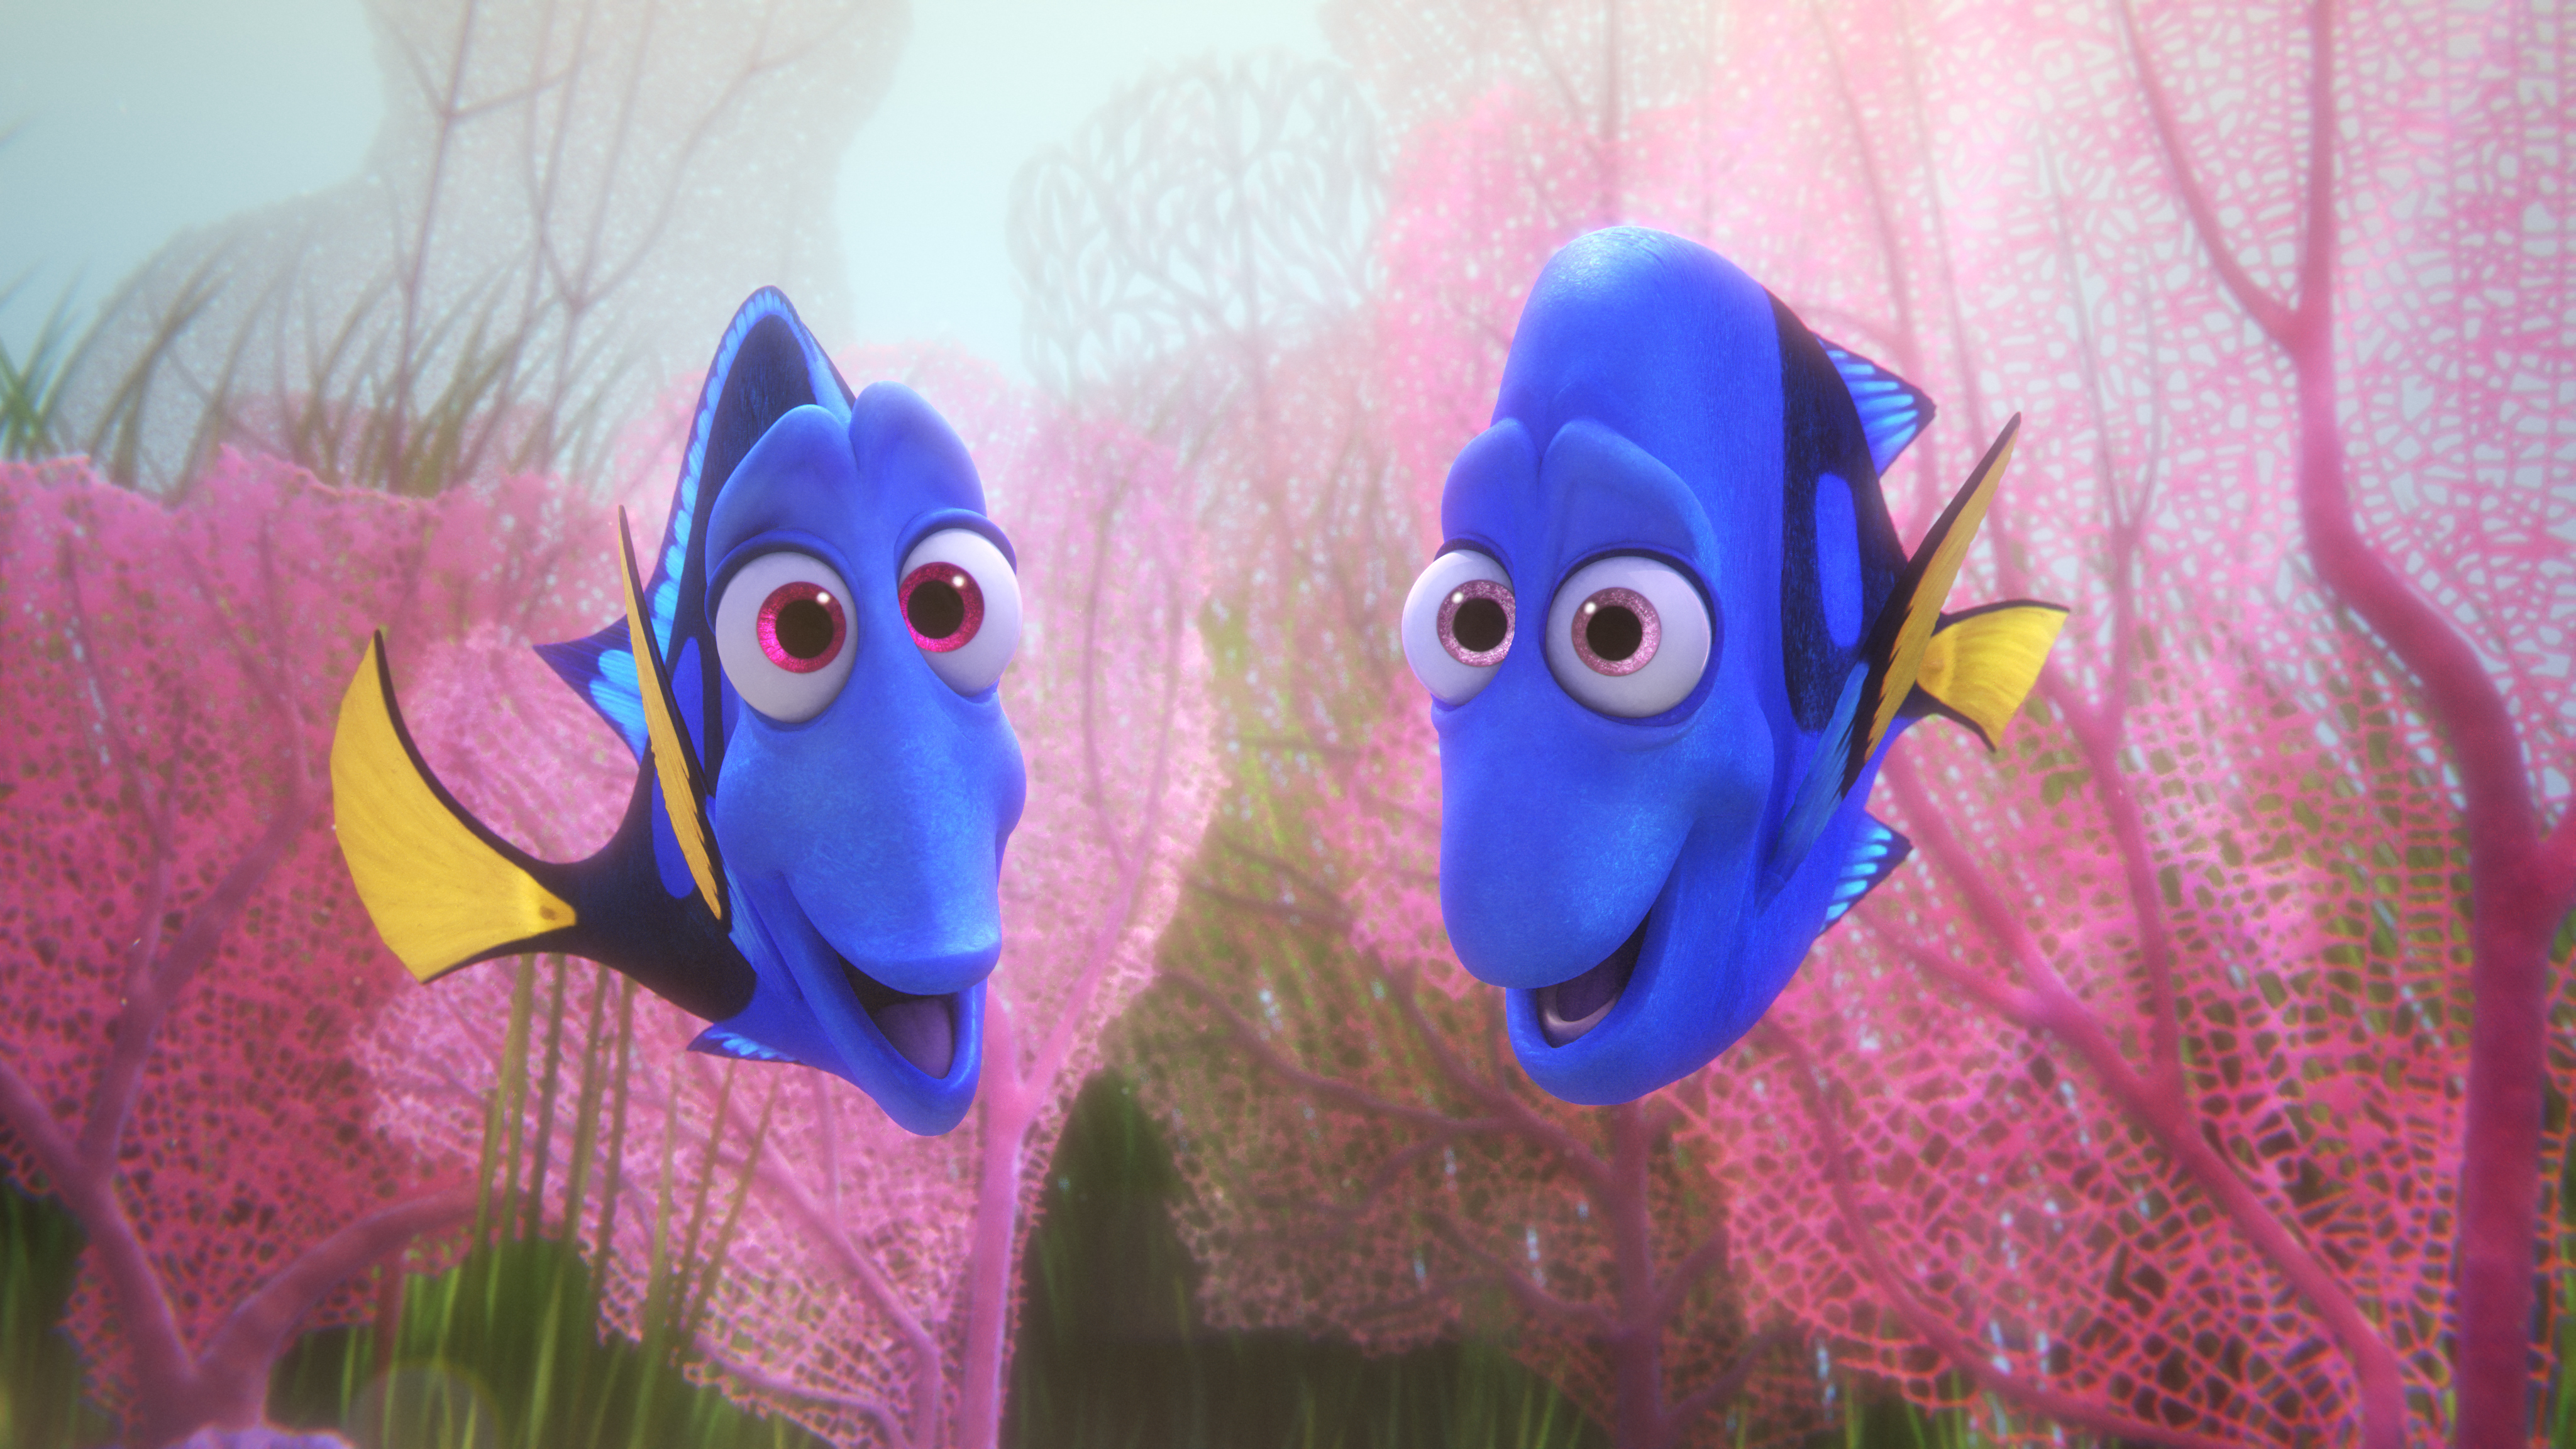 Finding Dory Is Now Playing in Theaters Everywhere! #FindingDory